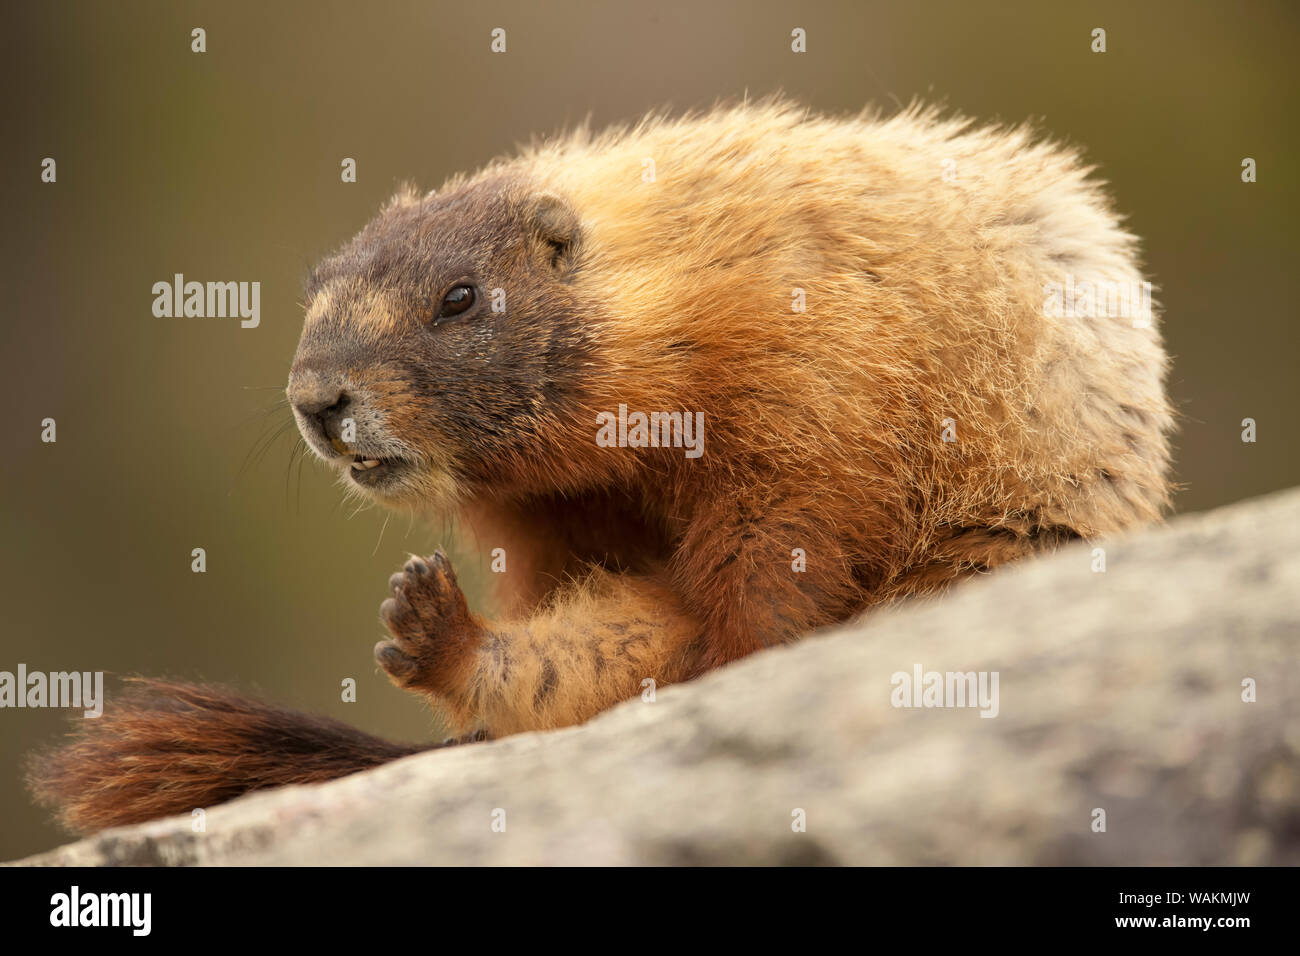 Yellowstone National Park, Wyoming, USA. Yellow-bellied marmot grooming itself while sitting on a boulder. Stock Photo